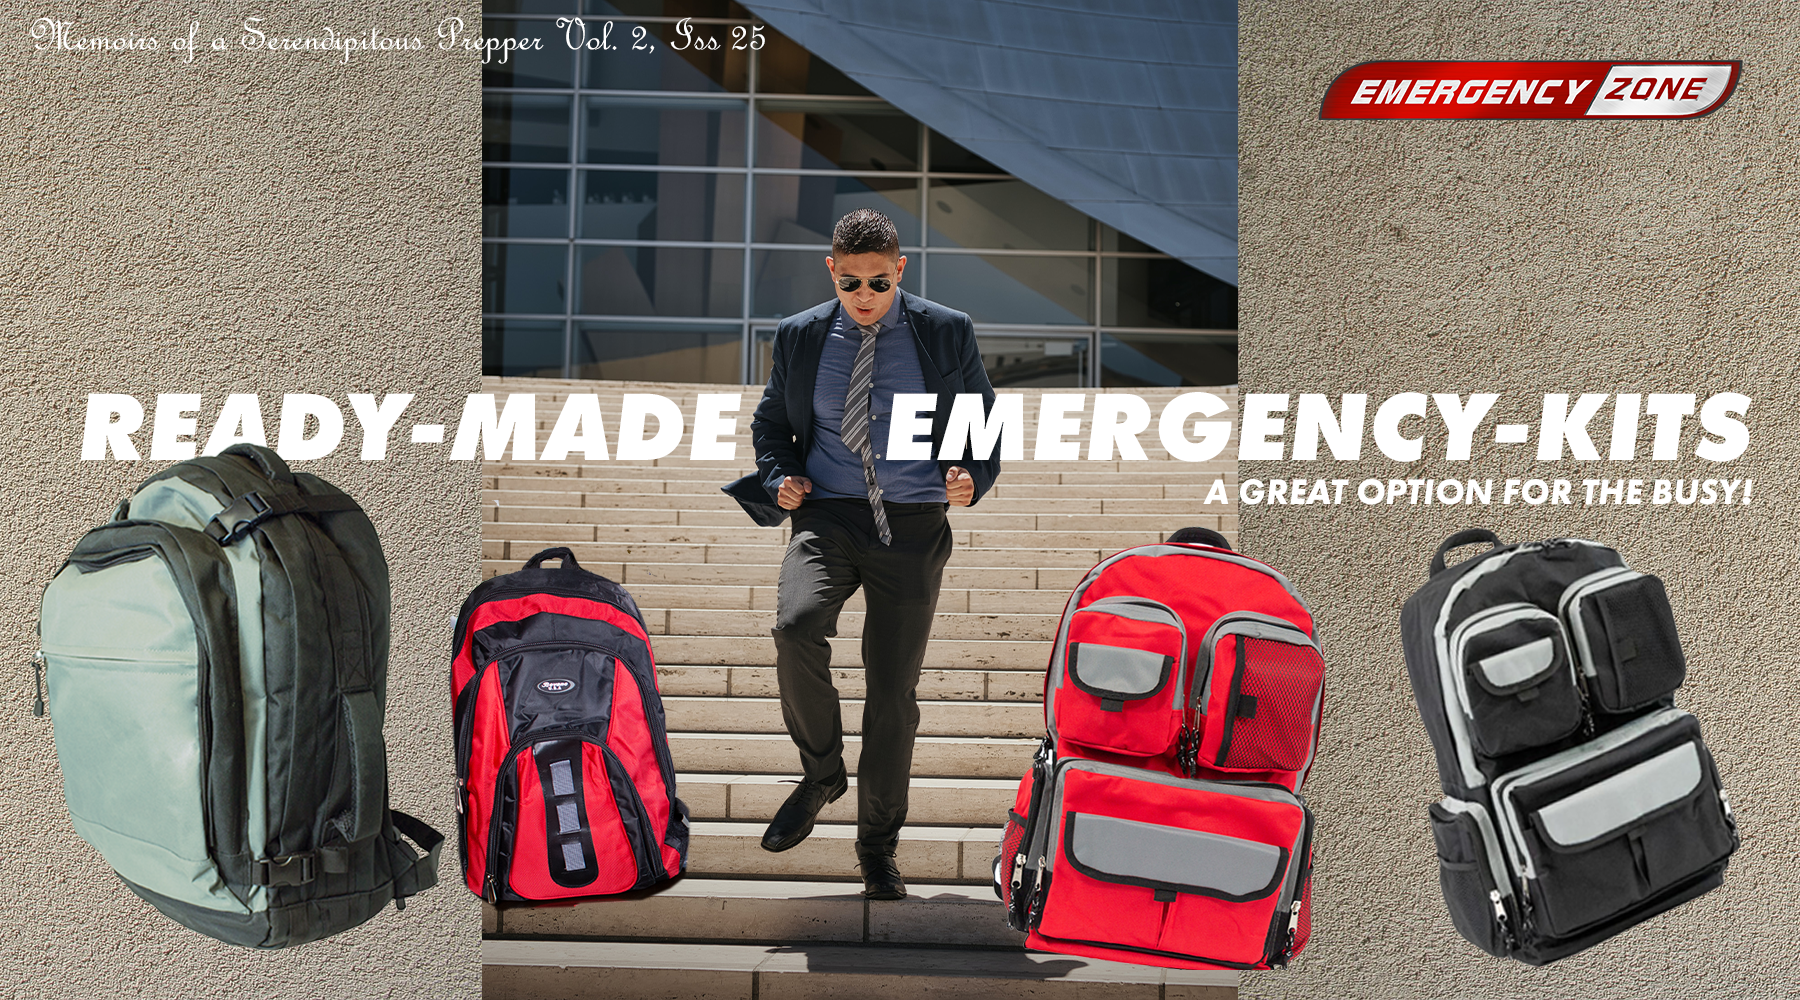 Ready Made Emergency Kits - A Great Option for the Busy!